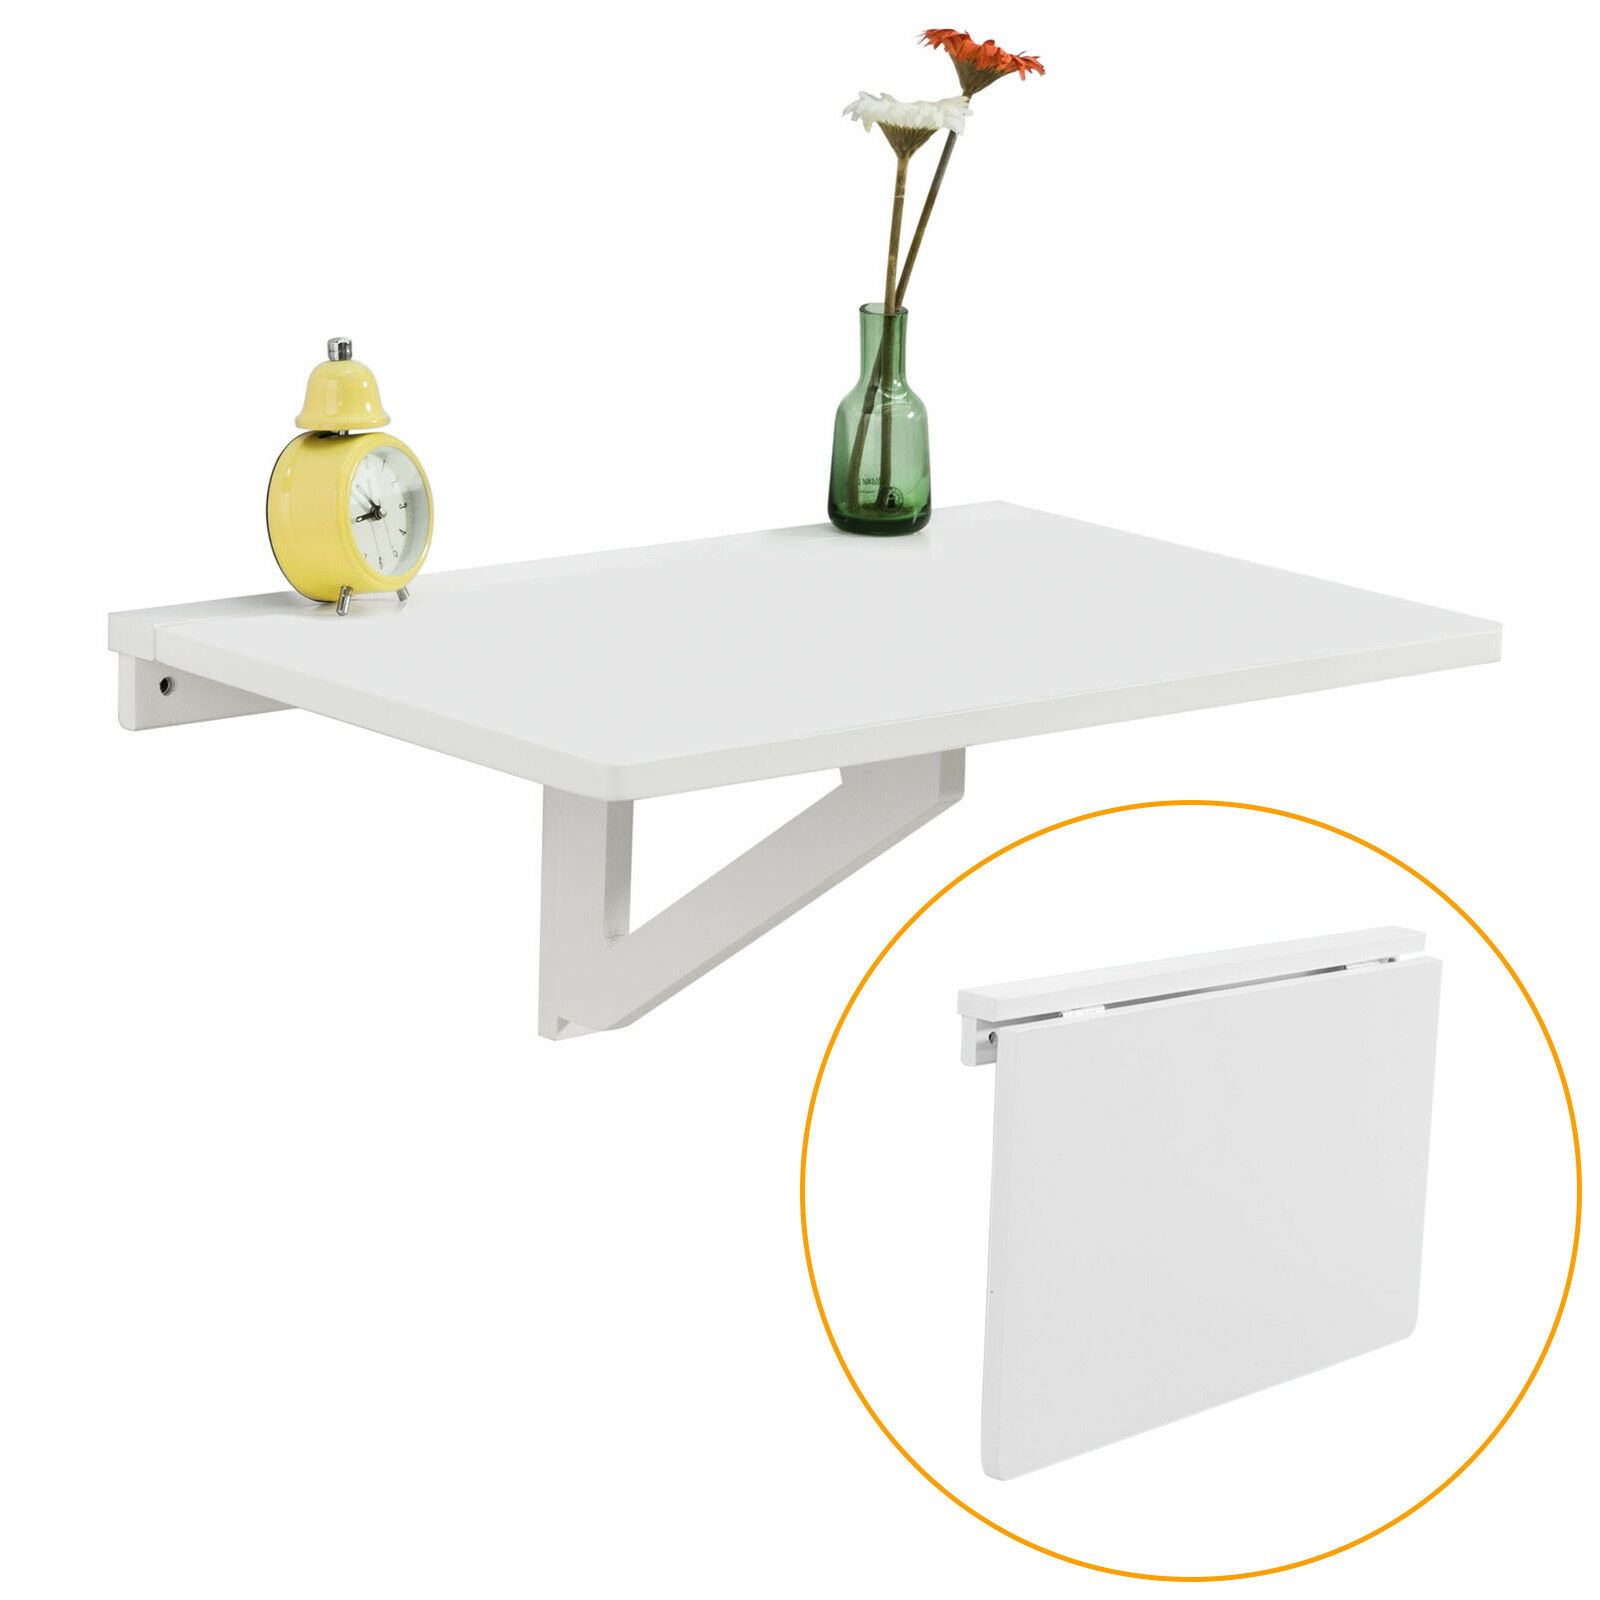 Bathroom or Balcony Bedroom Floating Computer Desk Dining Table Coffee Drop-Leaf Drop-Leaf Wall Mounted Table Gosuguu Wall-Mounted Folding Table Space Saving Hanging Table for Study